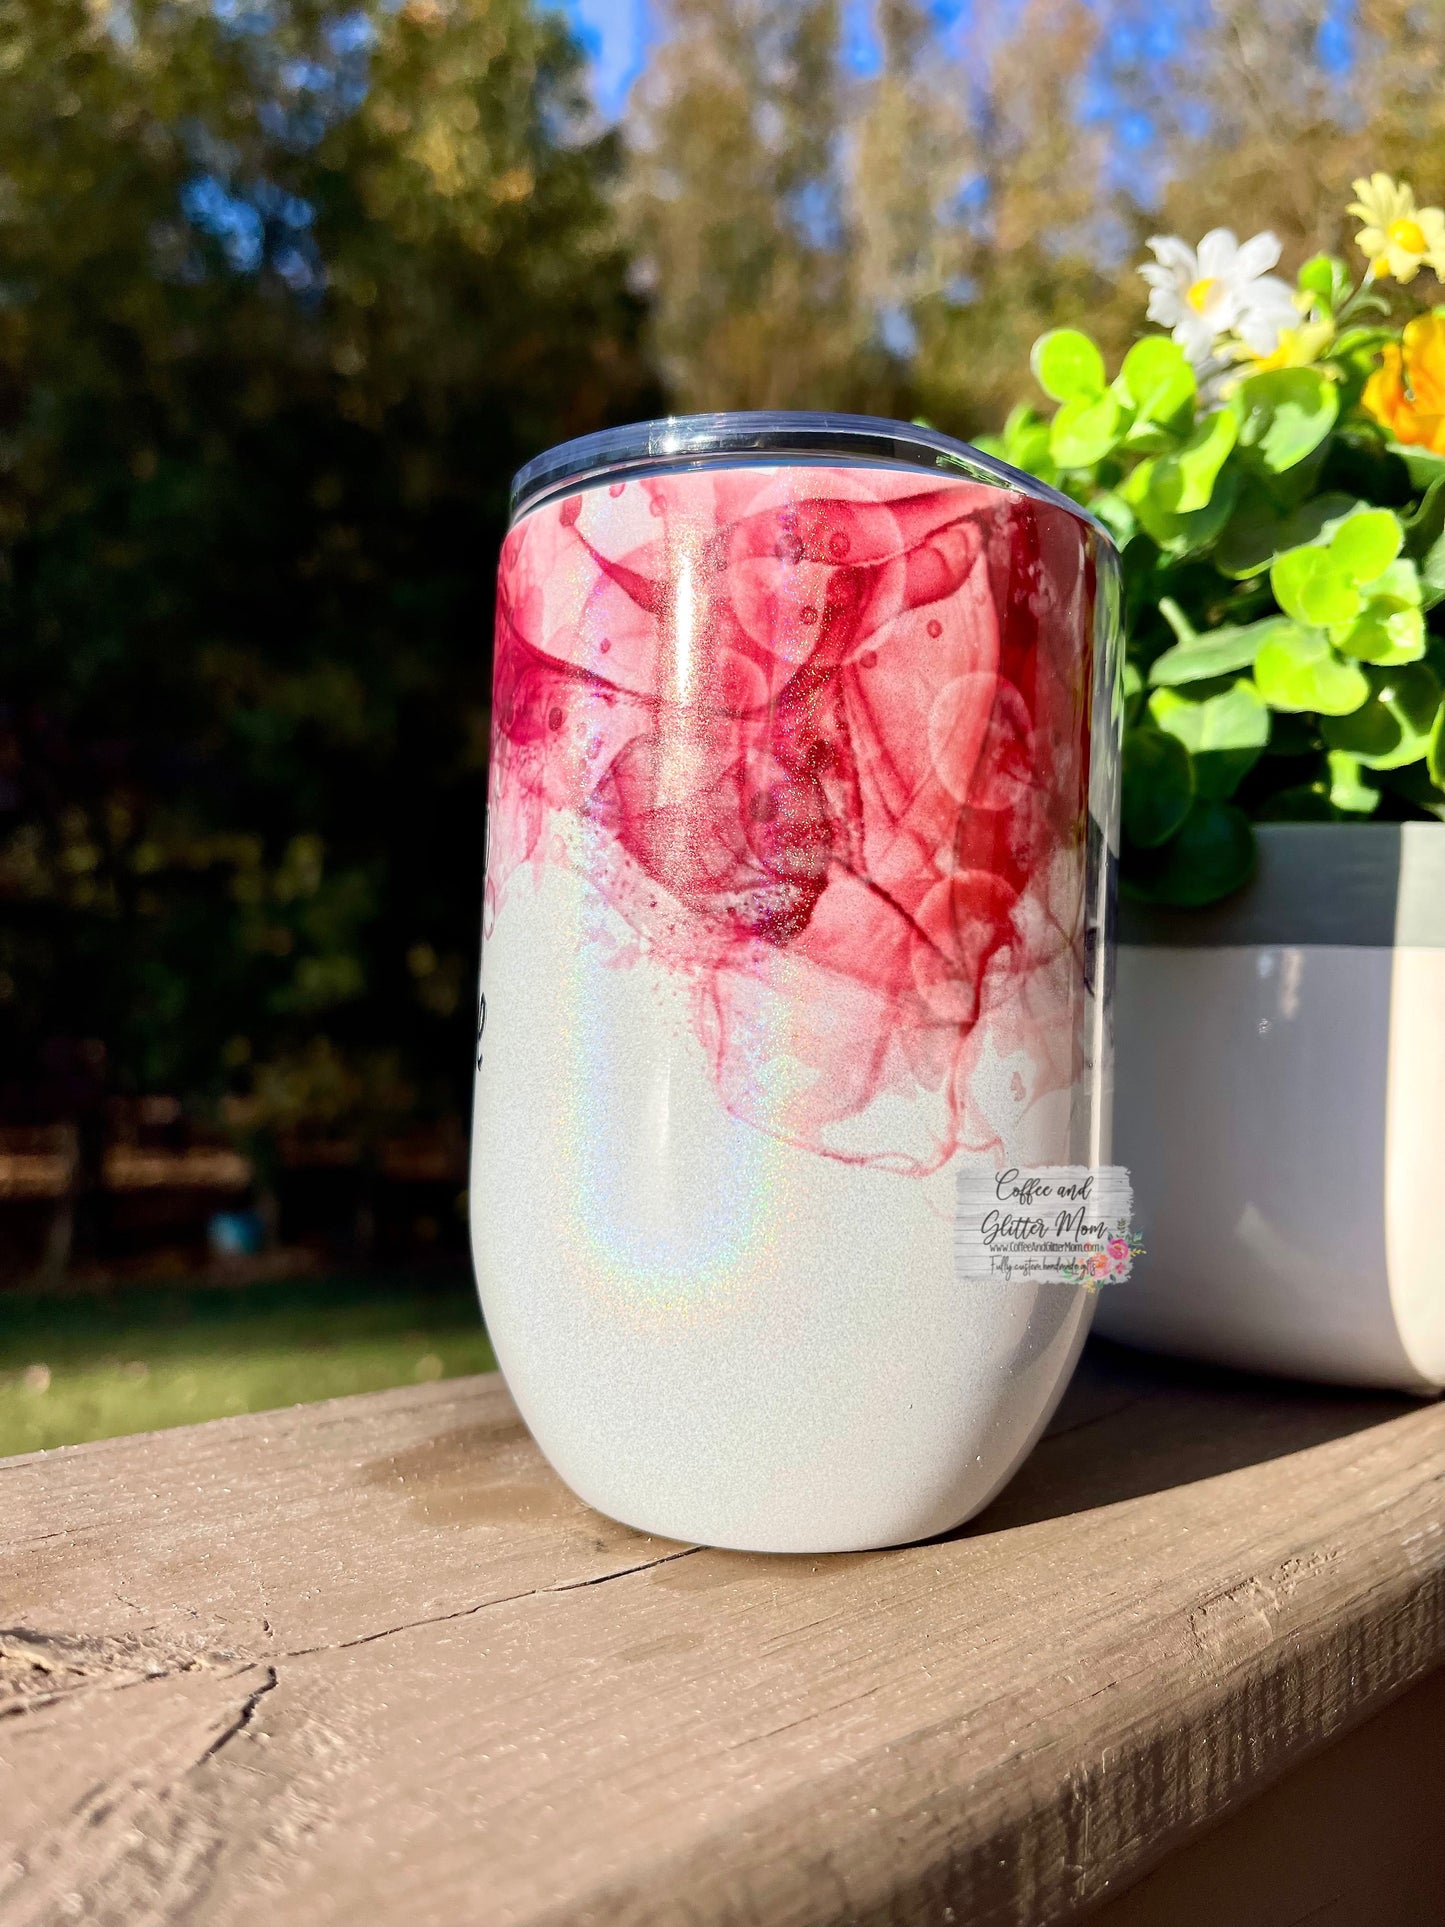 Will Trade Husband for Wine 12oz Holographic Sparkle Wine Tumbler